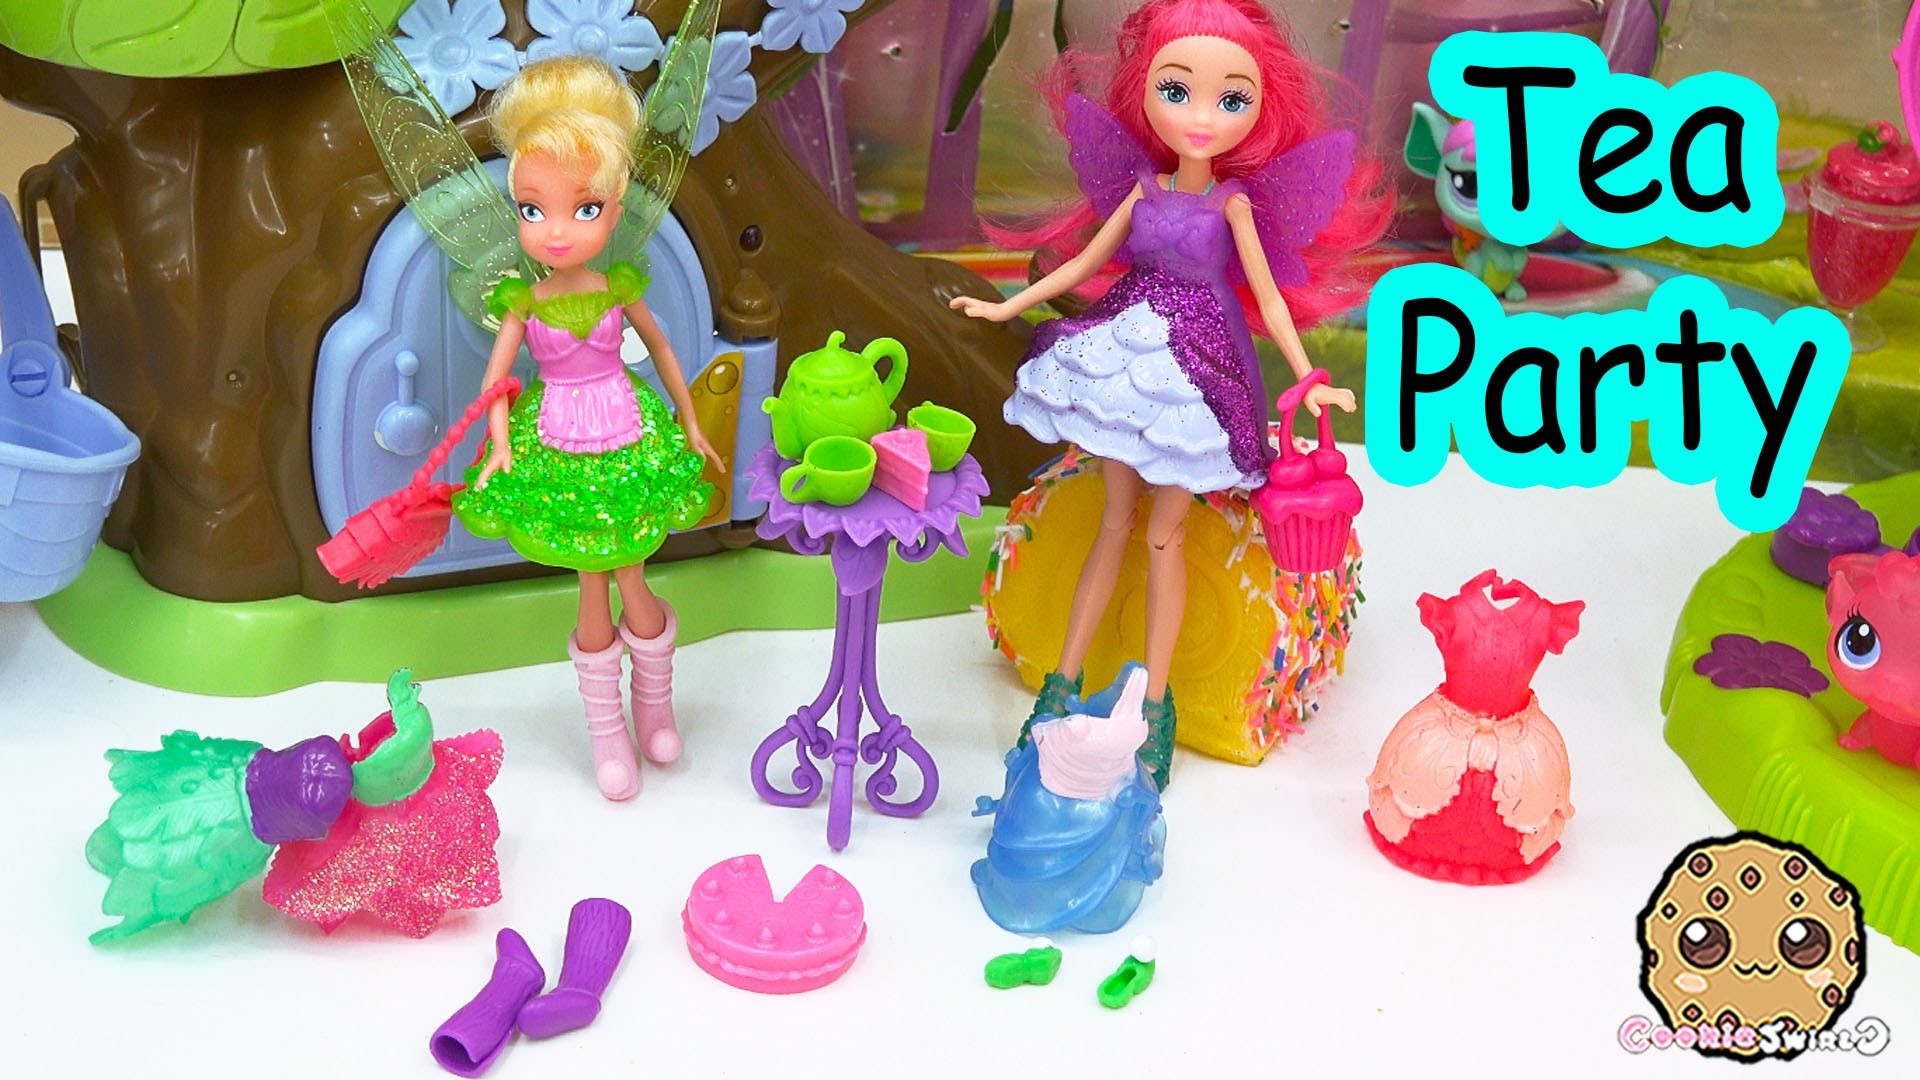 1920x1080 Disney Faries Tinker Bell Pixie Sweets Bakery Mini Fairy Doll Dress Up Tea  Party With Barbie - YouTube